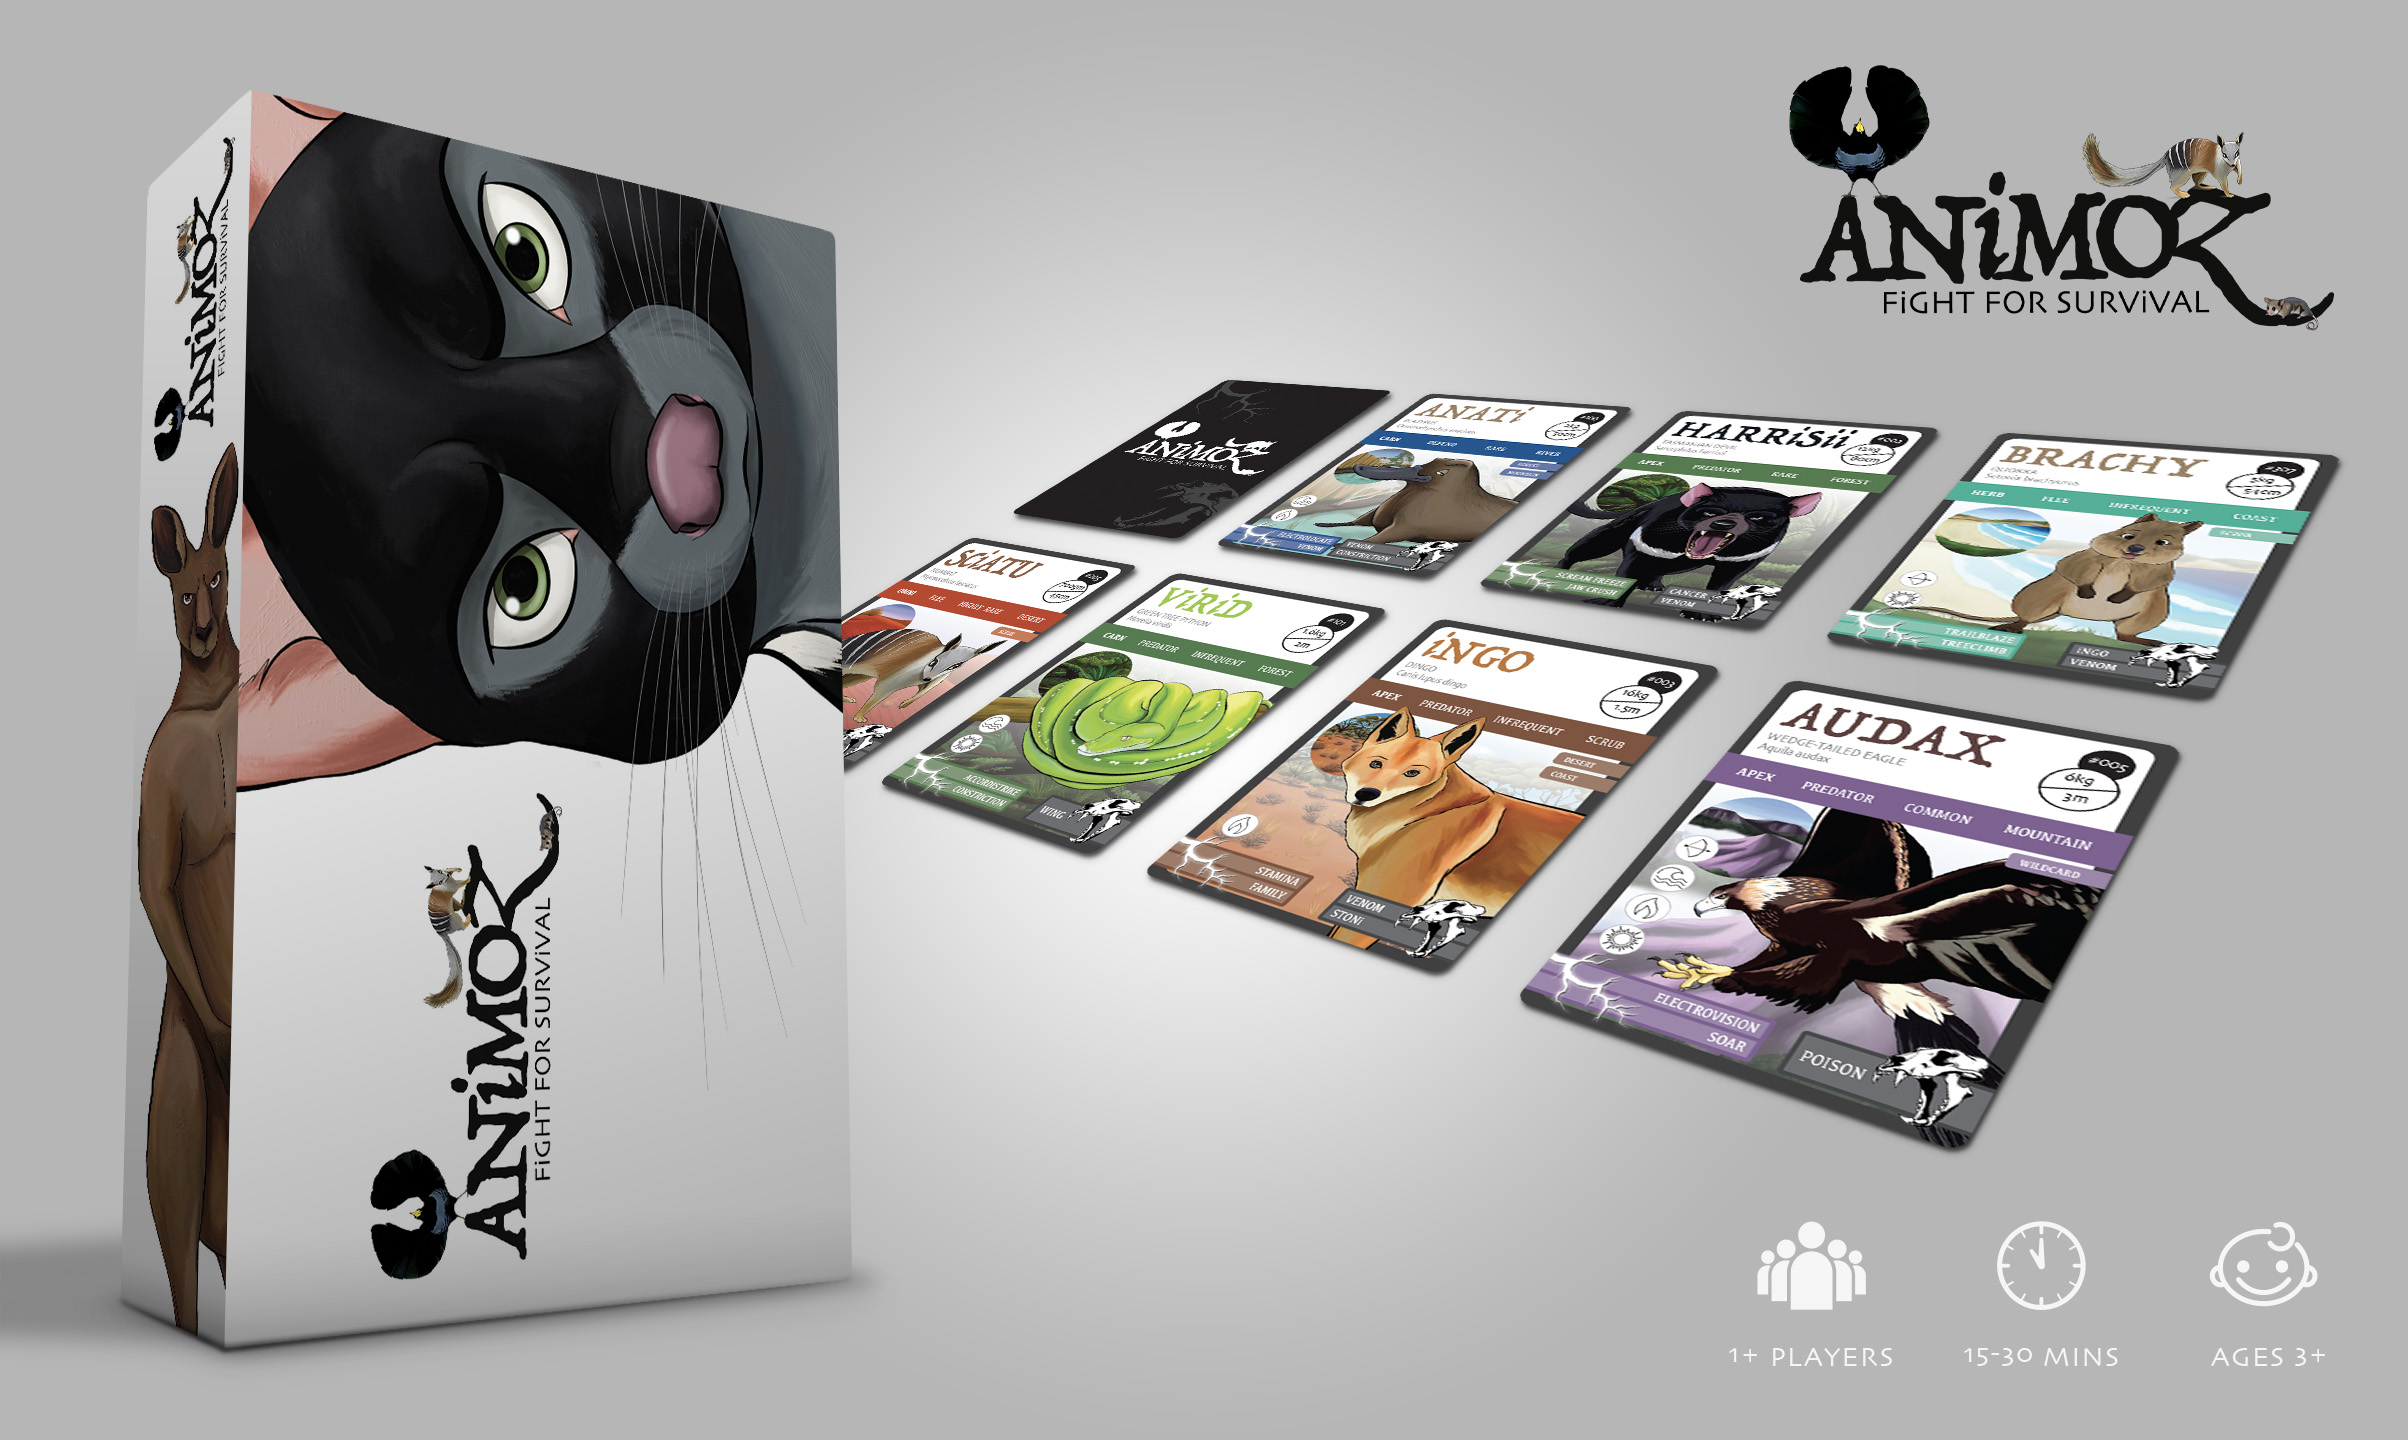 ANiMOZ - Fight for Survival - the game changing conservation - Collectible card game of Australian Animals - card game - Collectible Card Game - Australian conservation - Eastern quoll - boardgame - tabletop game - toys for kids